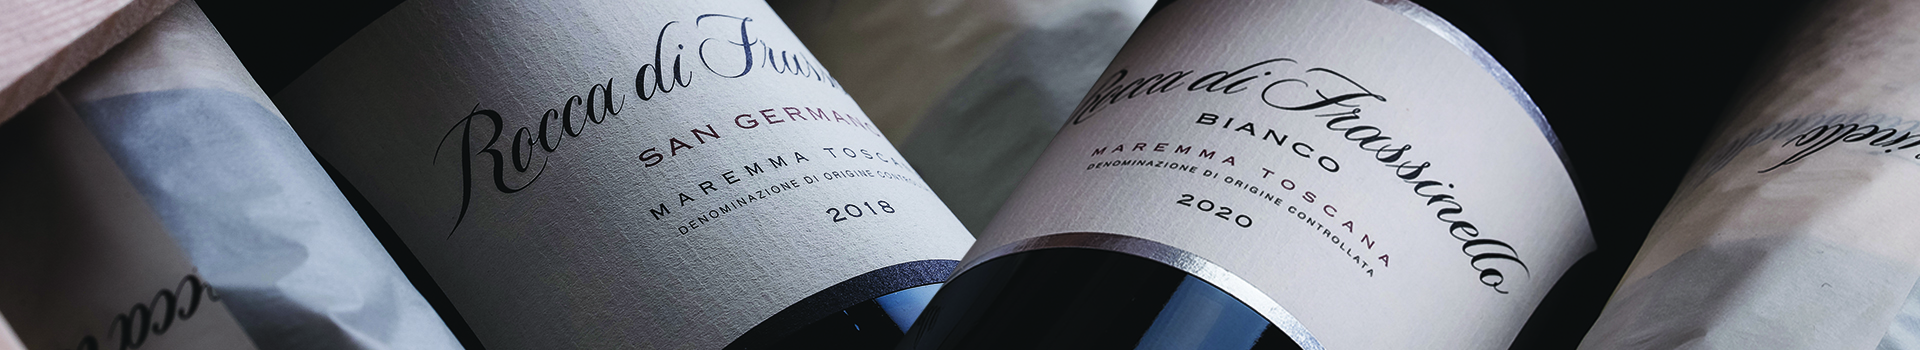 ROCCA DI FRASSINELLO BIANCO AND SAN GERMANOTWO NEW TOP WINES RELEASED AT 54TH VINITALY